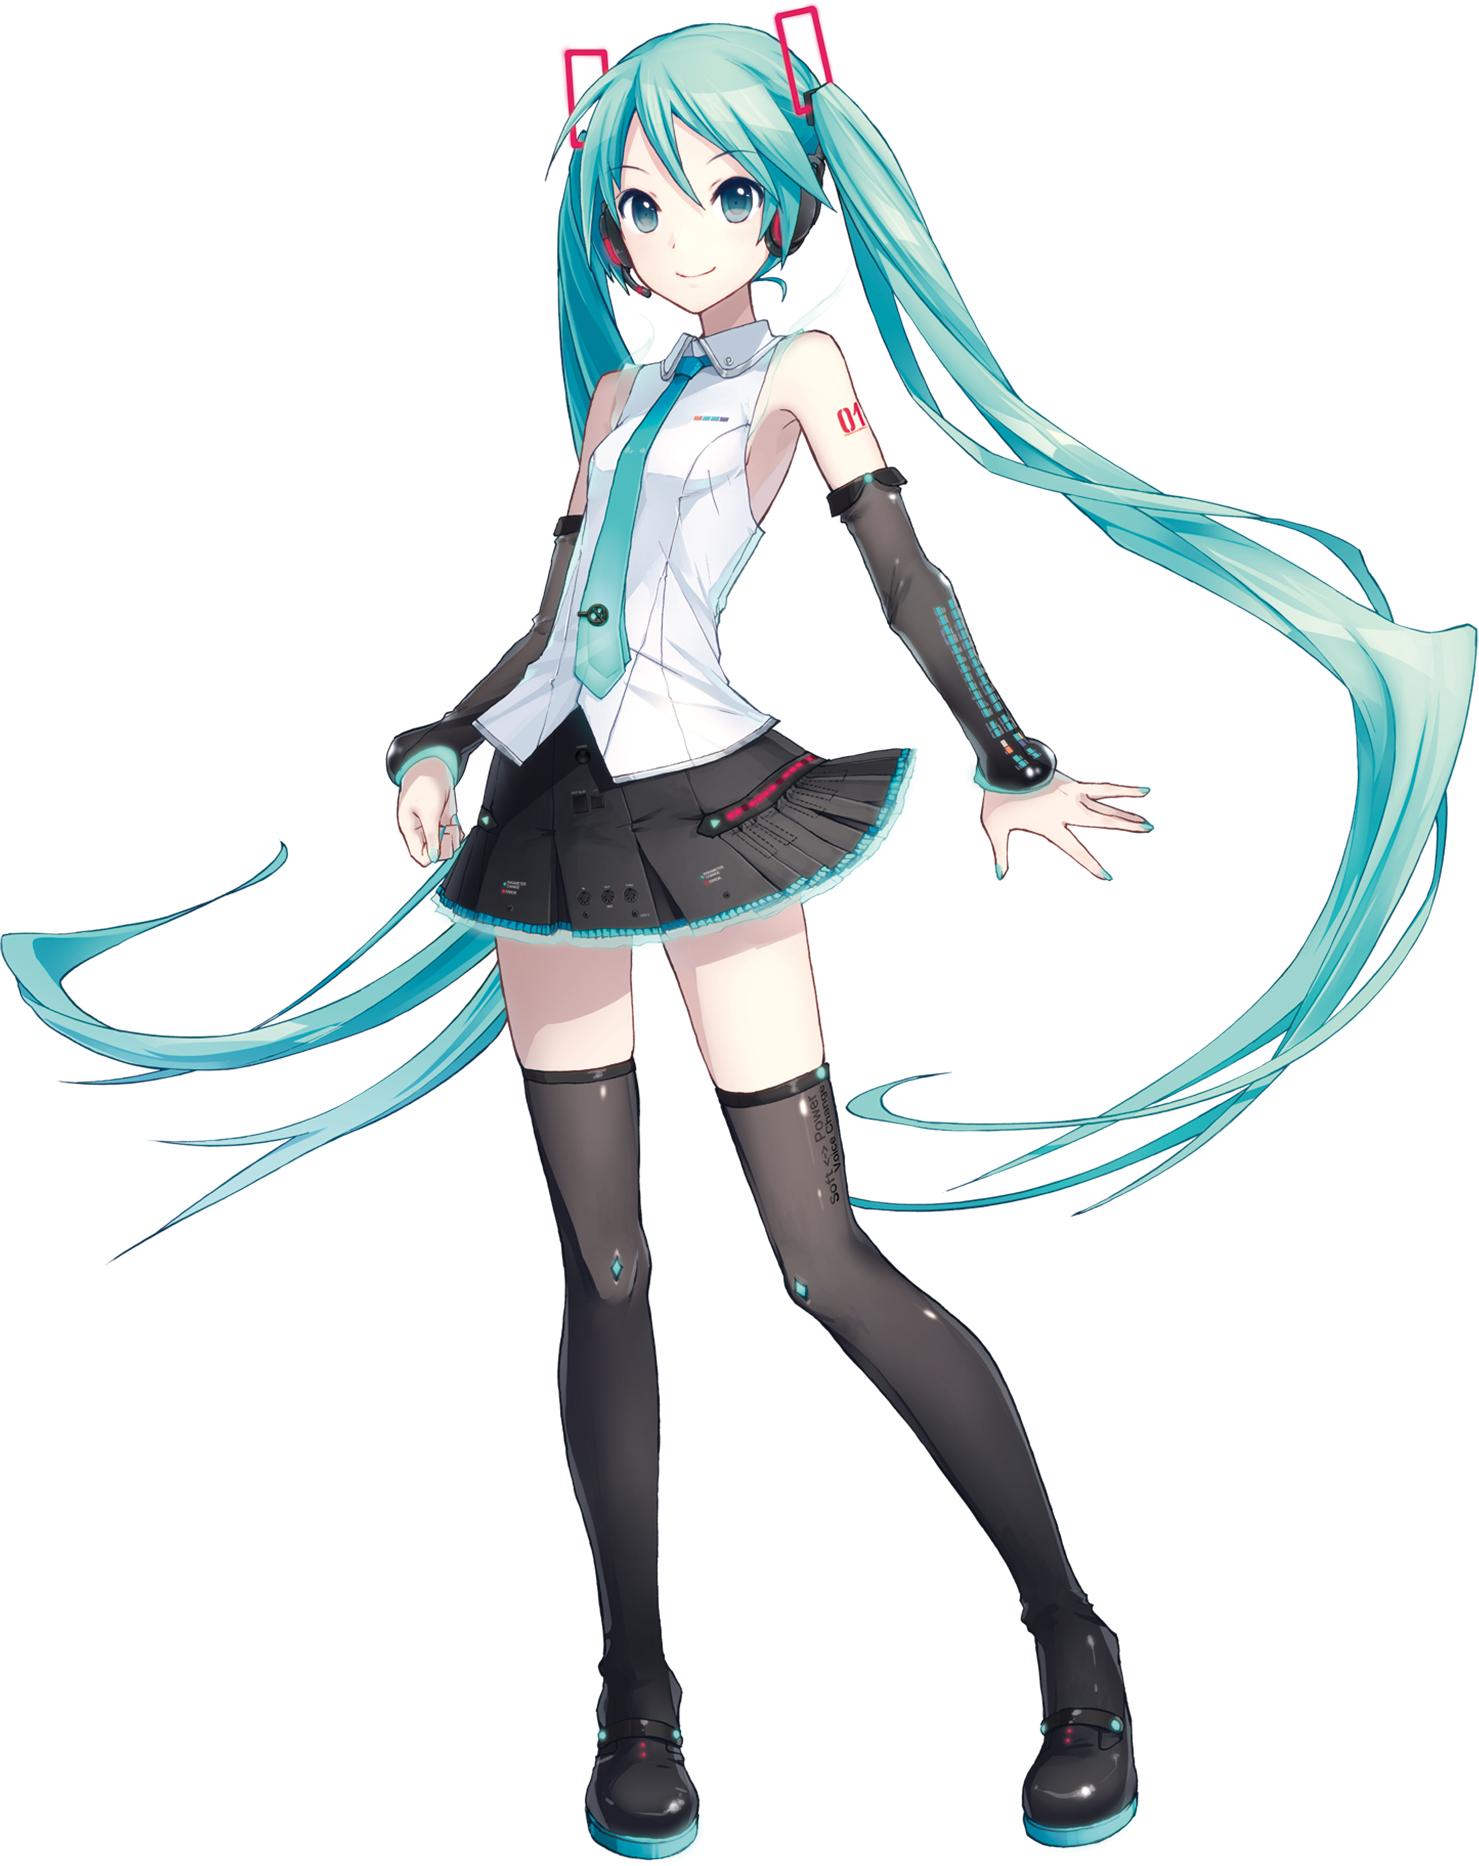 Image of Miku Hatsune from Vocaloid anime